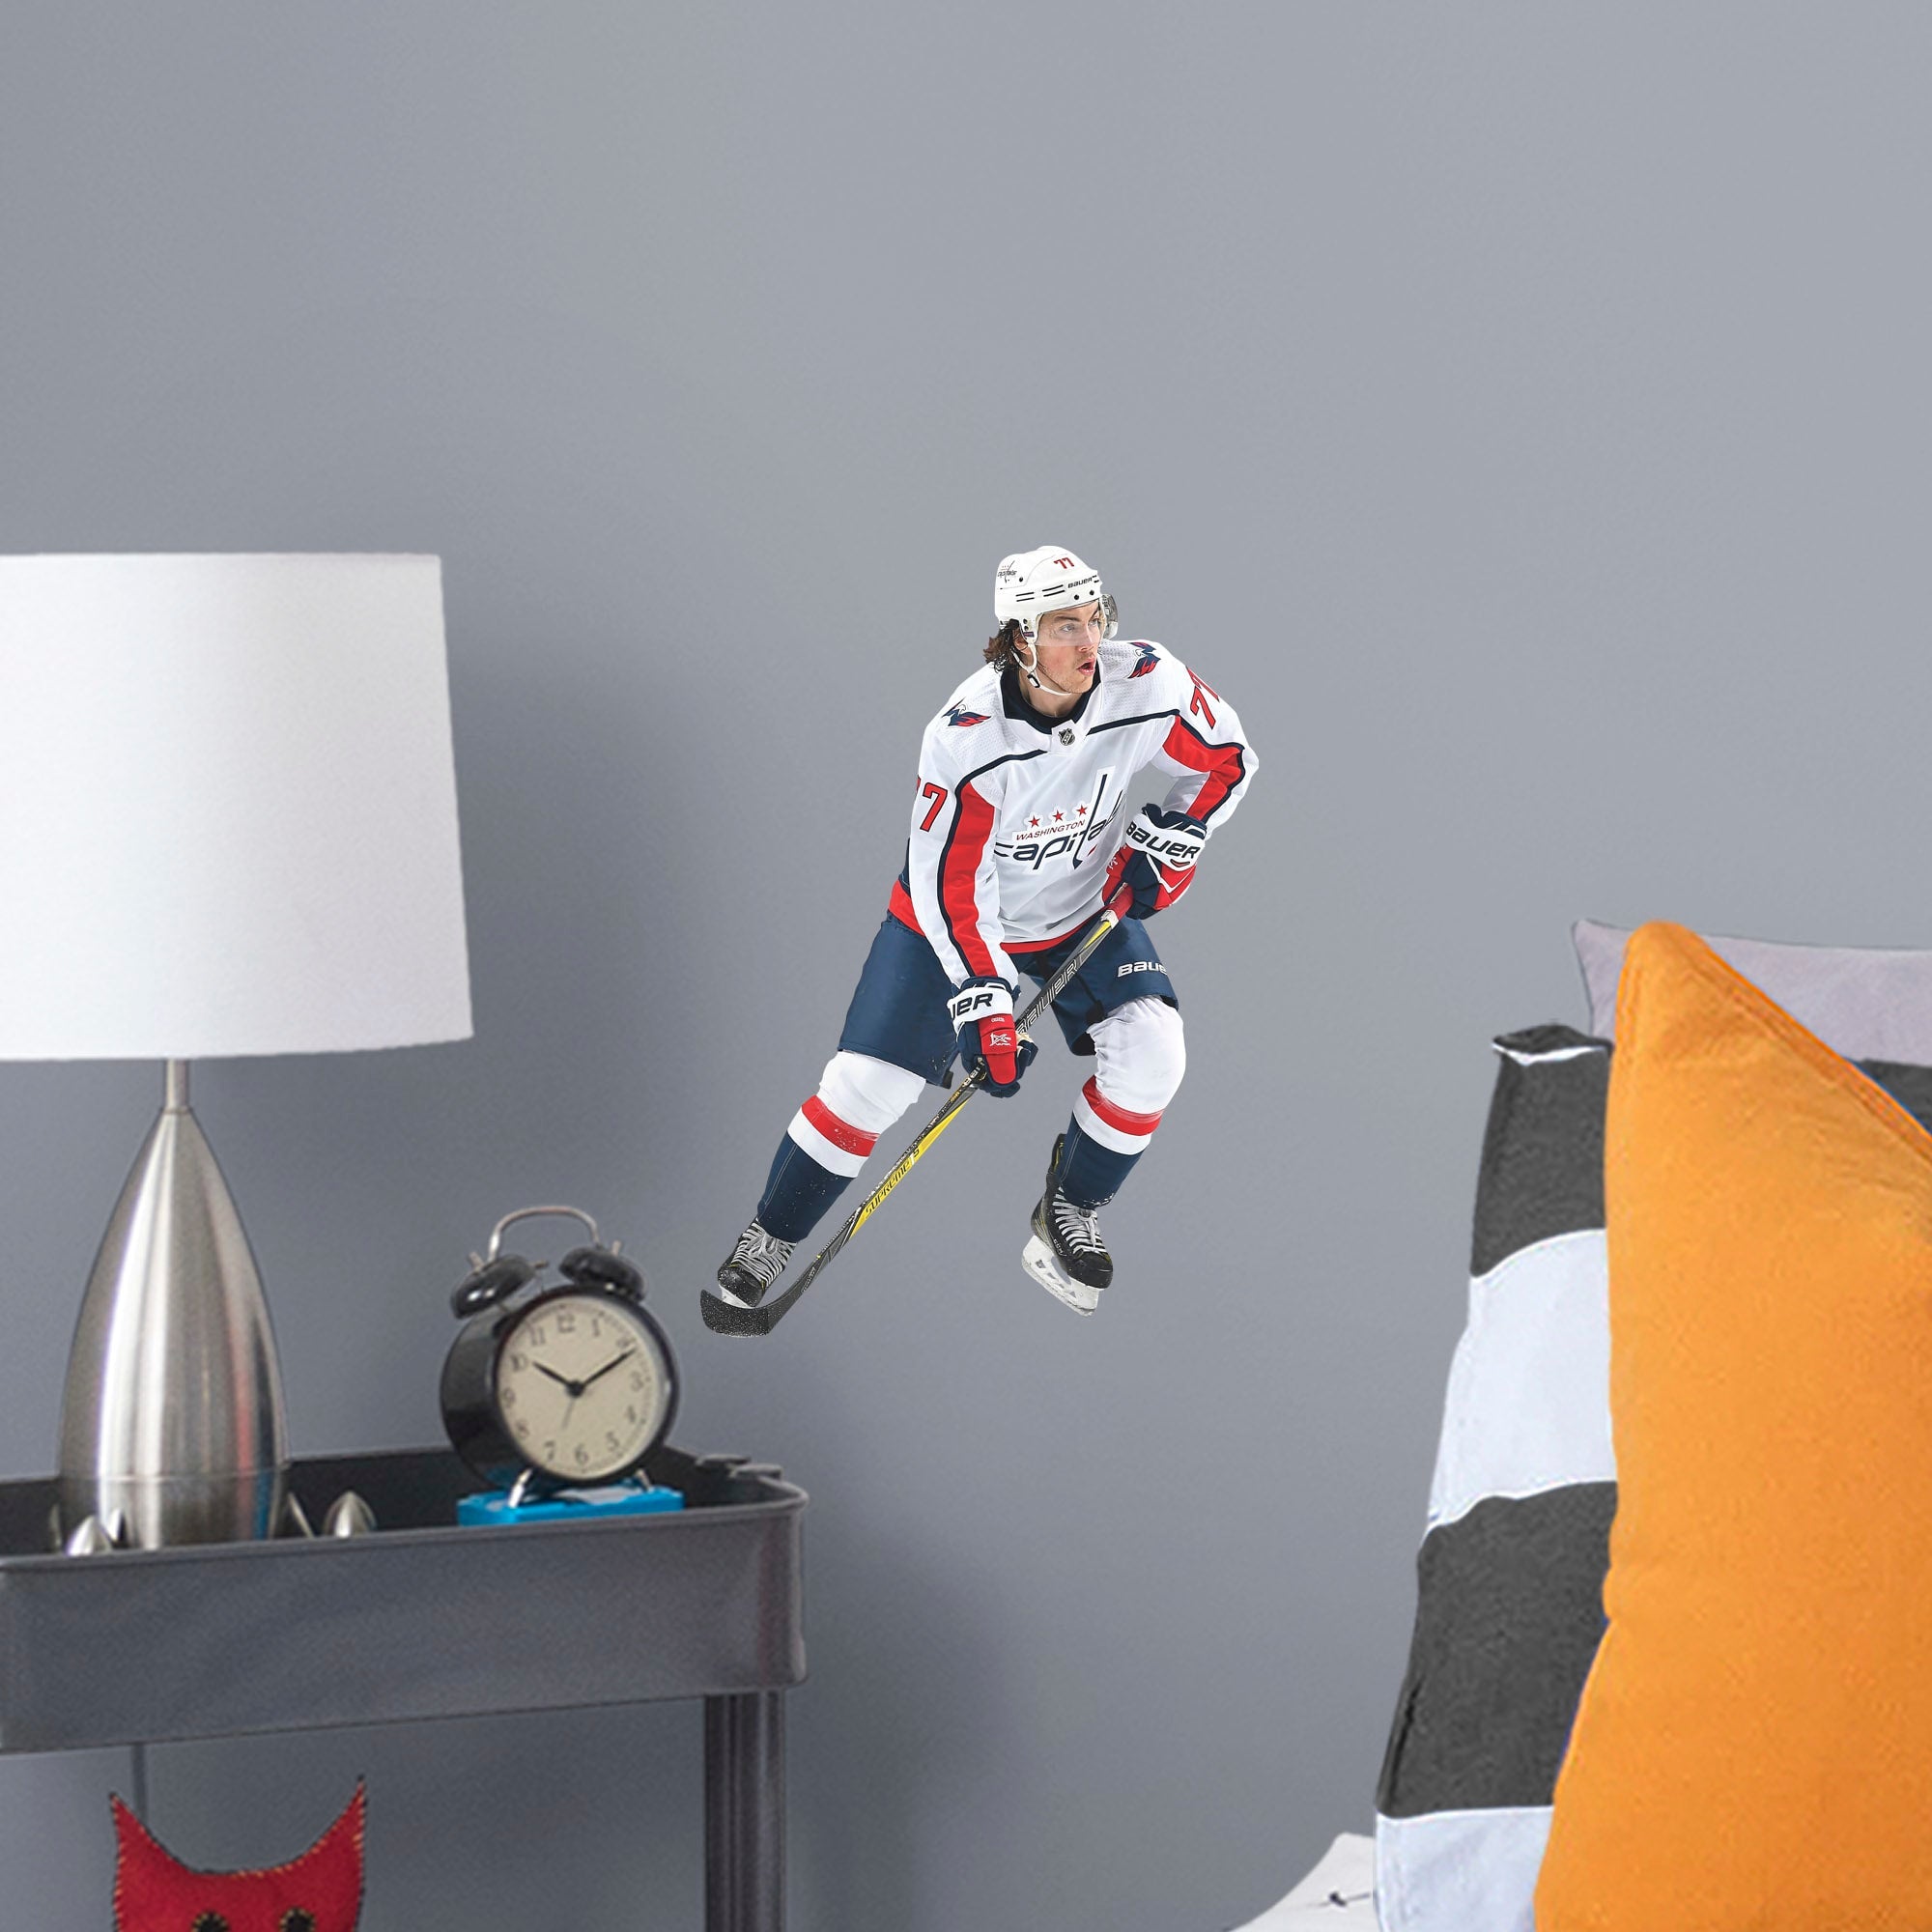 T.J. Oshie for Washington Capitals - Officially Licensed NHL Removable Wall Decal Large by Fathead | Vinyl